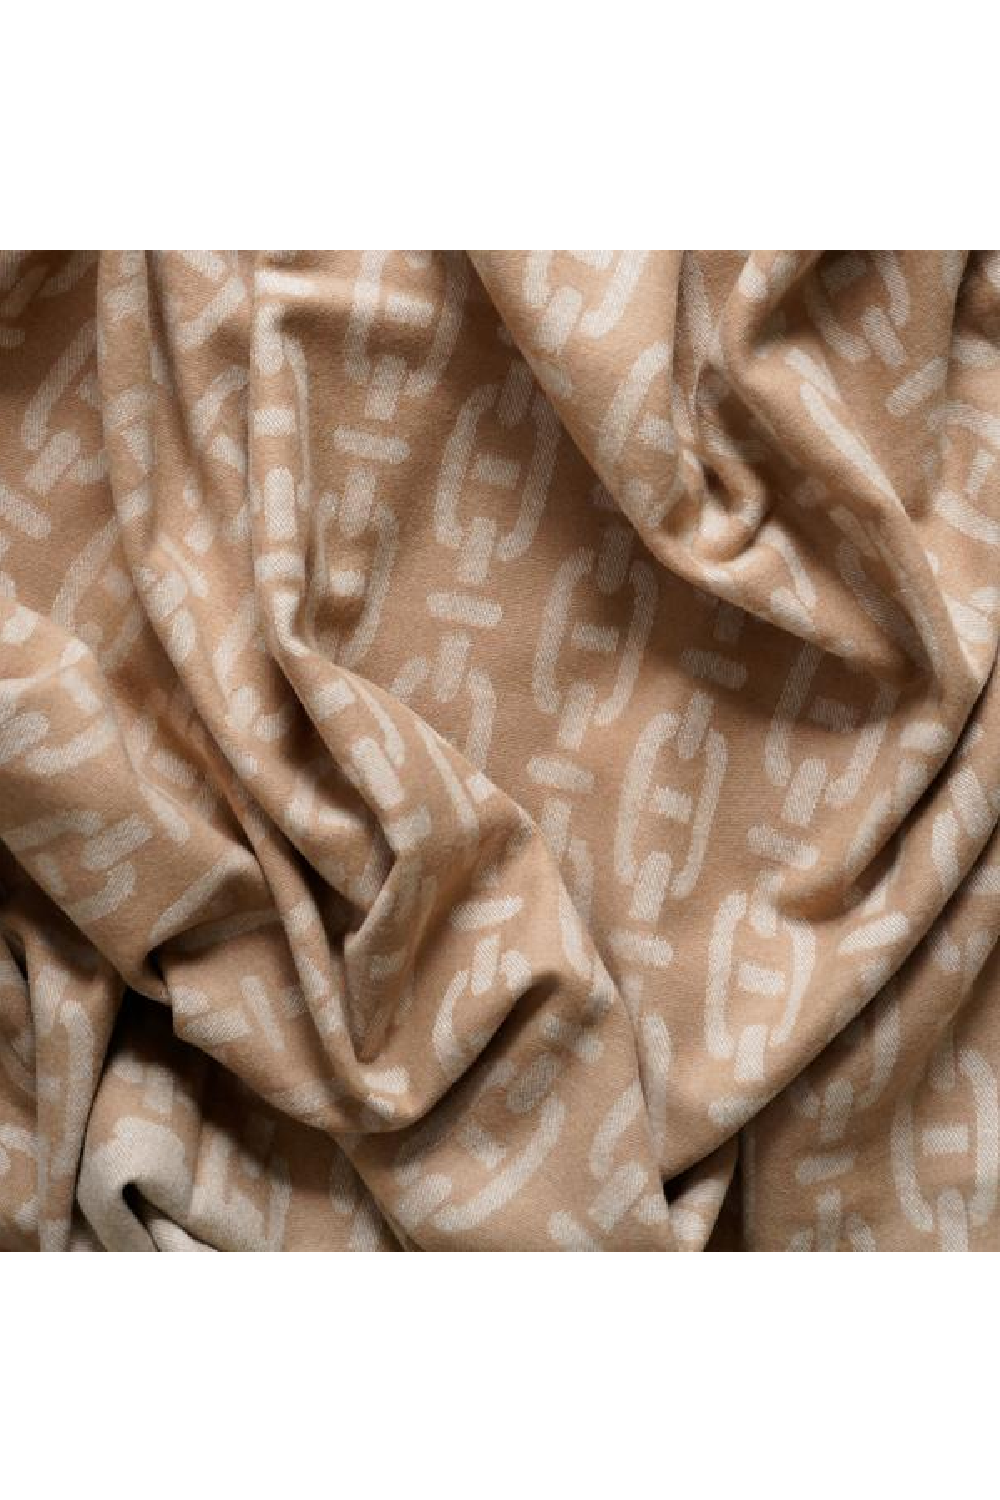 Tan Wool and Cashmere Chainlink Throw | Andrew Martin Burlington